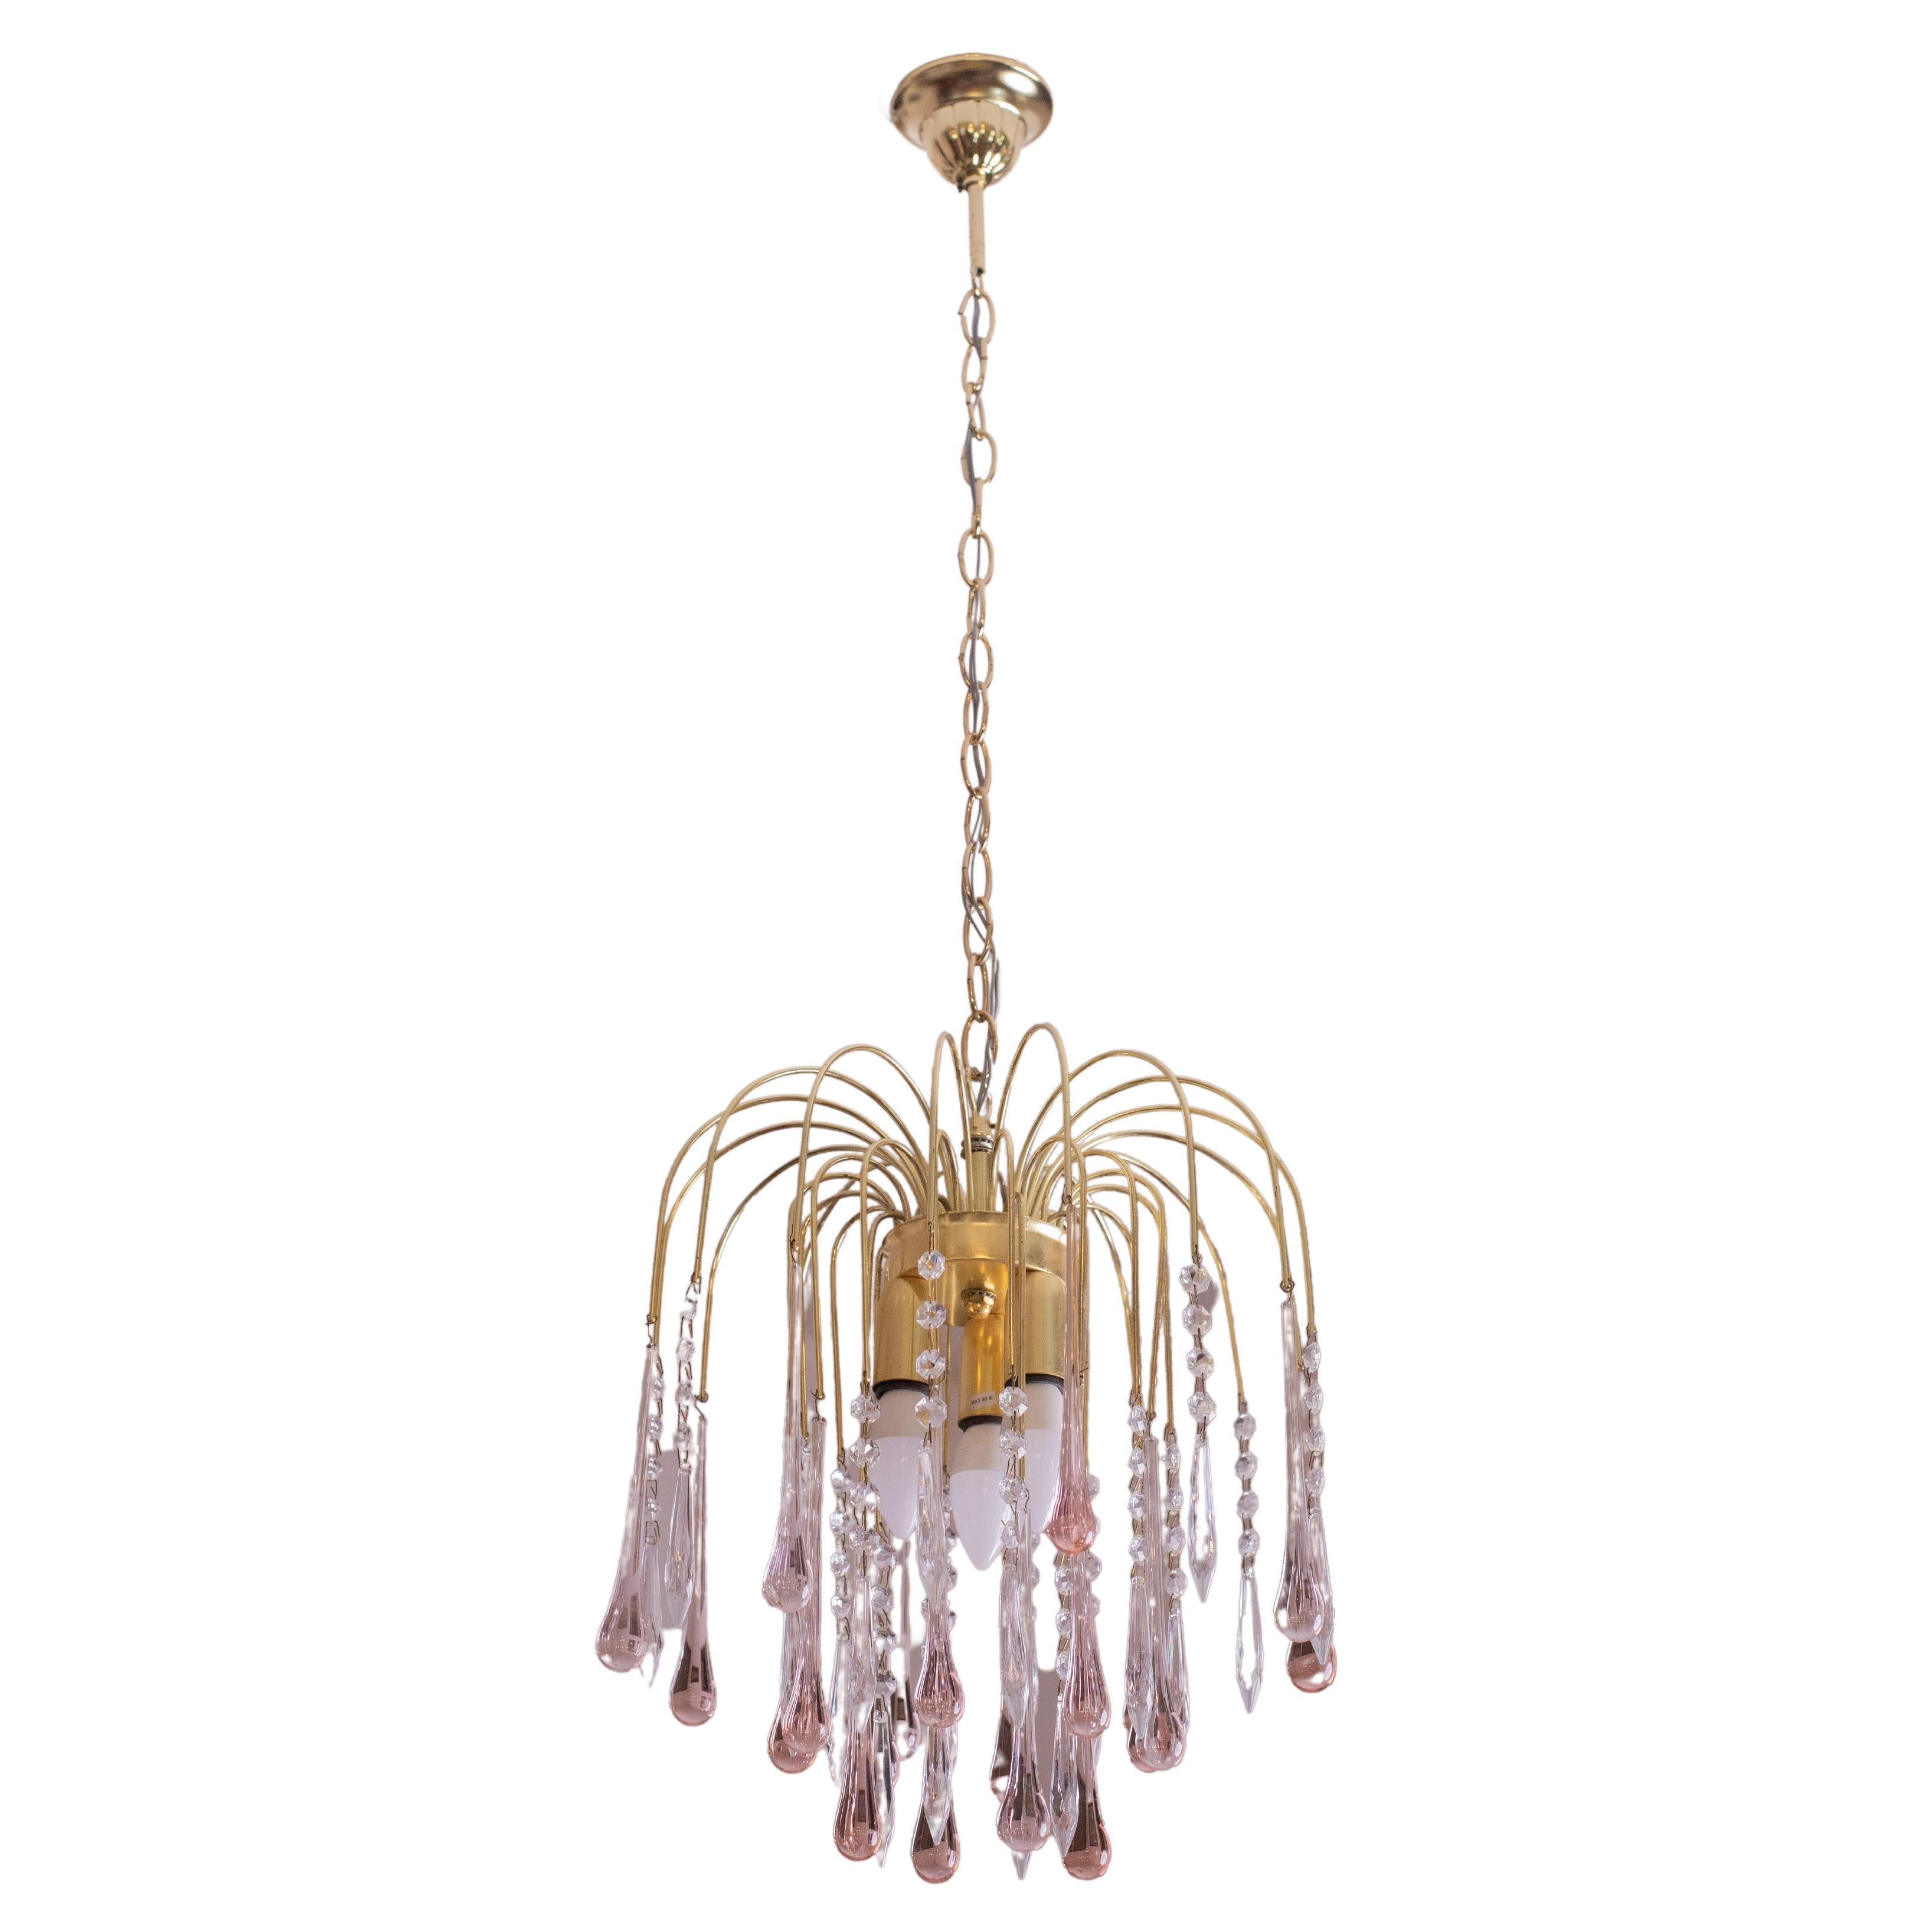 Gorgeous Murano chandelier in the style of Venini La Cascata.
The frames are in perfect aesthetic condition.
The chandeliers consist of three rounds composed of beautiful pink drops cascading down and alternating with crystals.
The chandelier